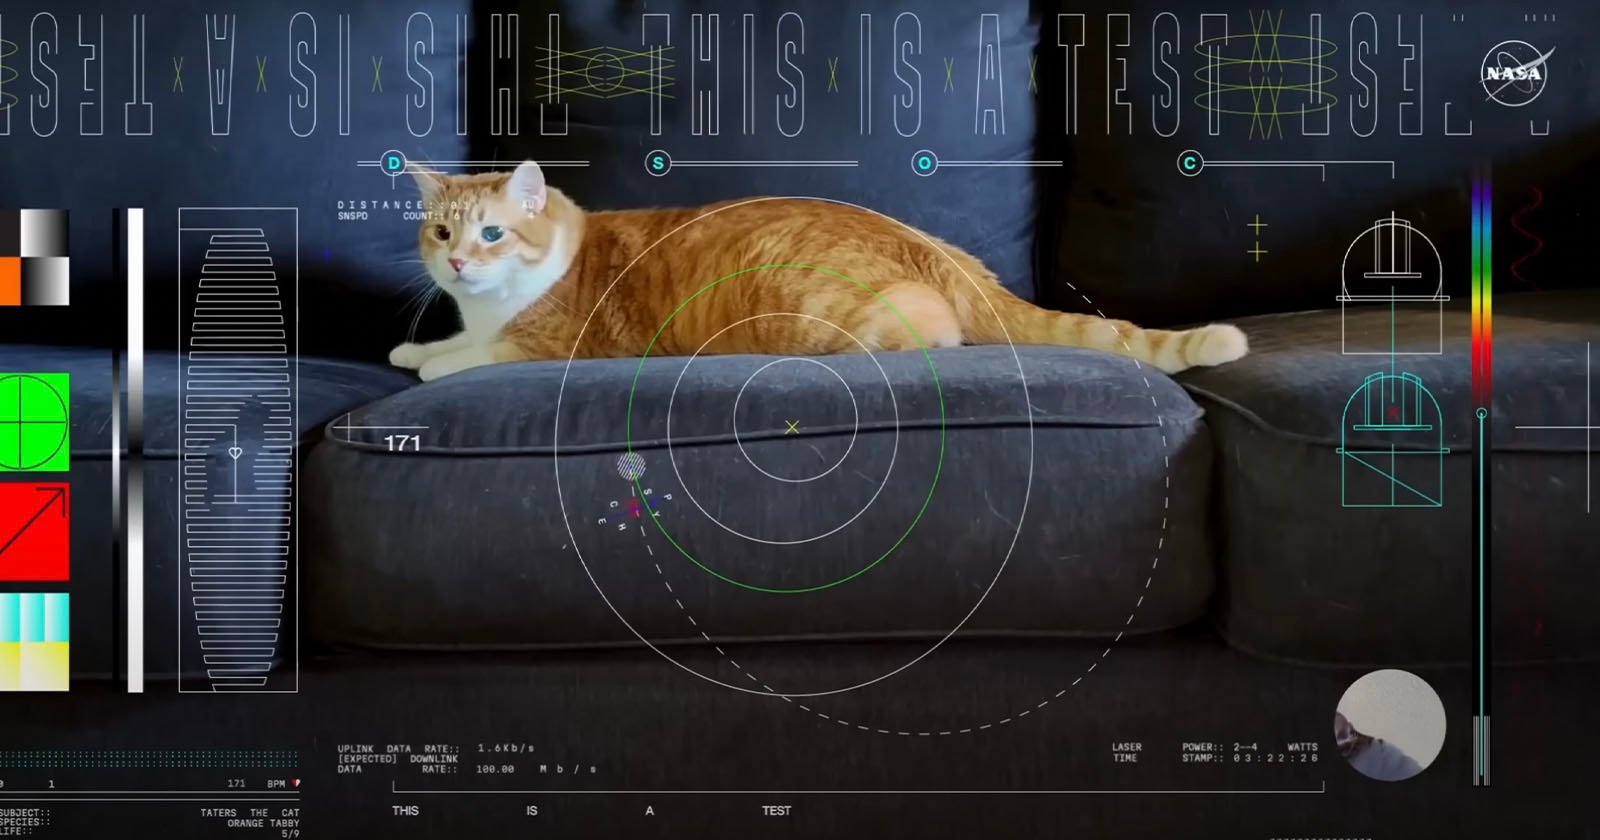  nasa streams cat video from deep space 